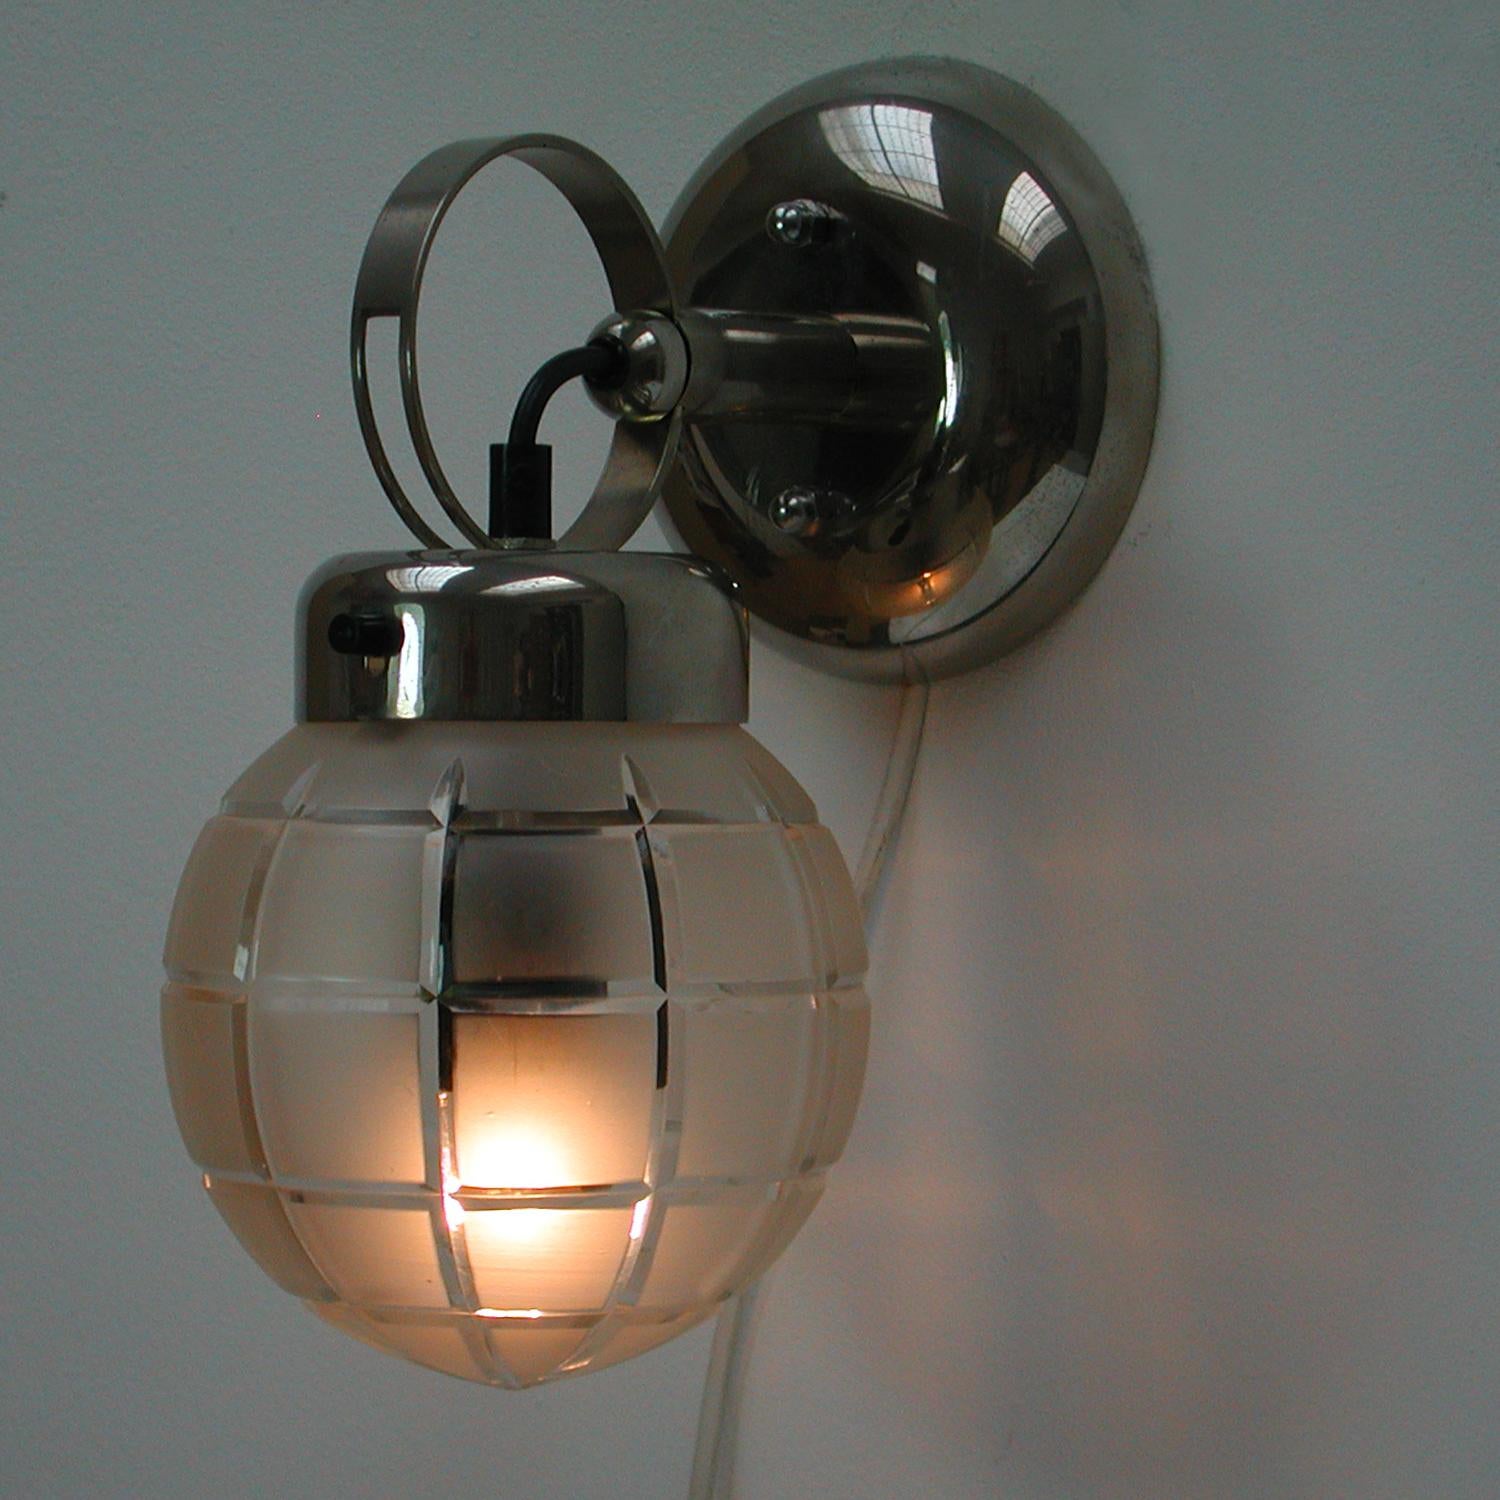 Stained Glass German Art Deco Bauhaus Chrome and Glass Wall Light Sconce, 1930s